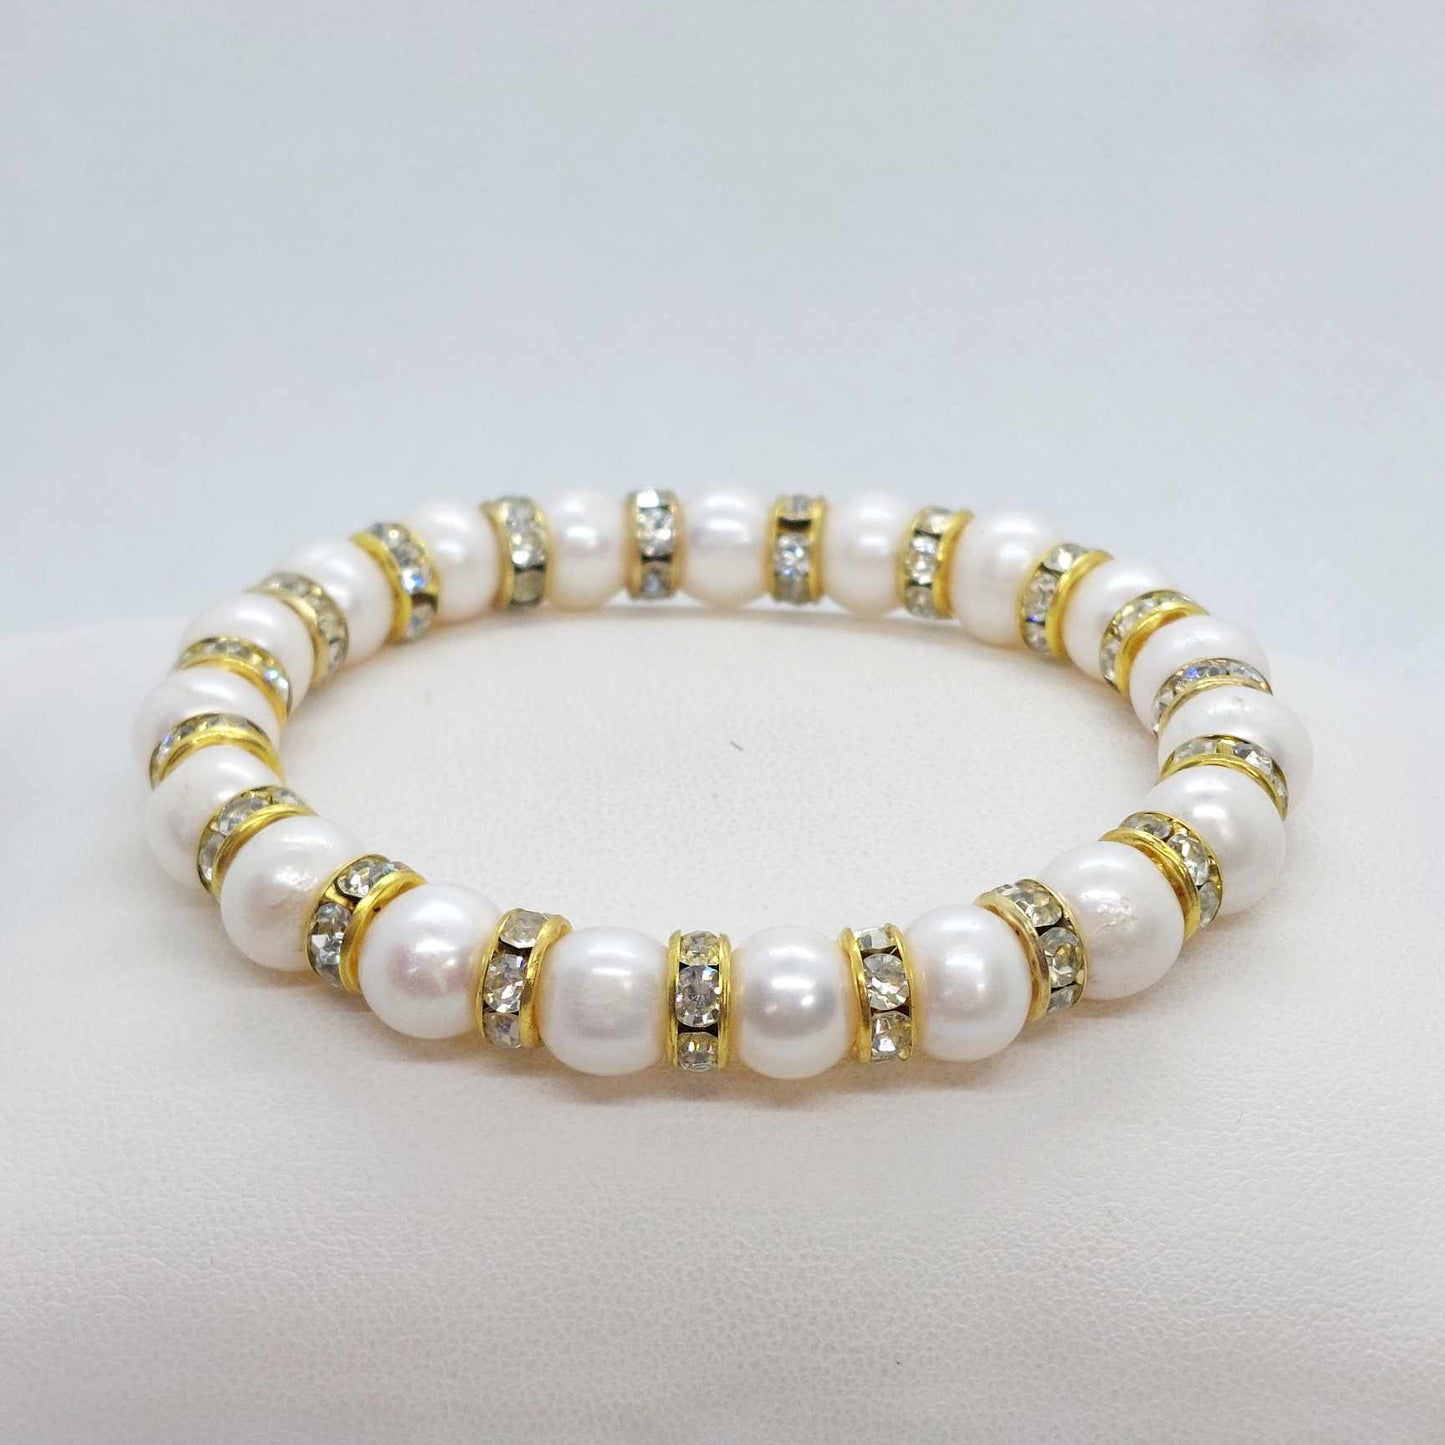 Natural Freshwater Pearl and Crystal Rhinestone Bracelet in 10mm Stones